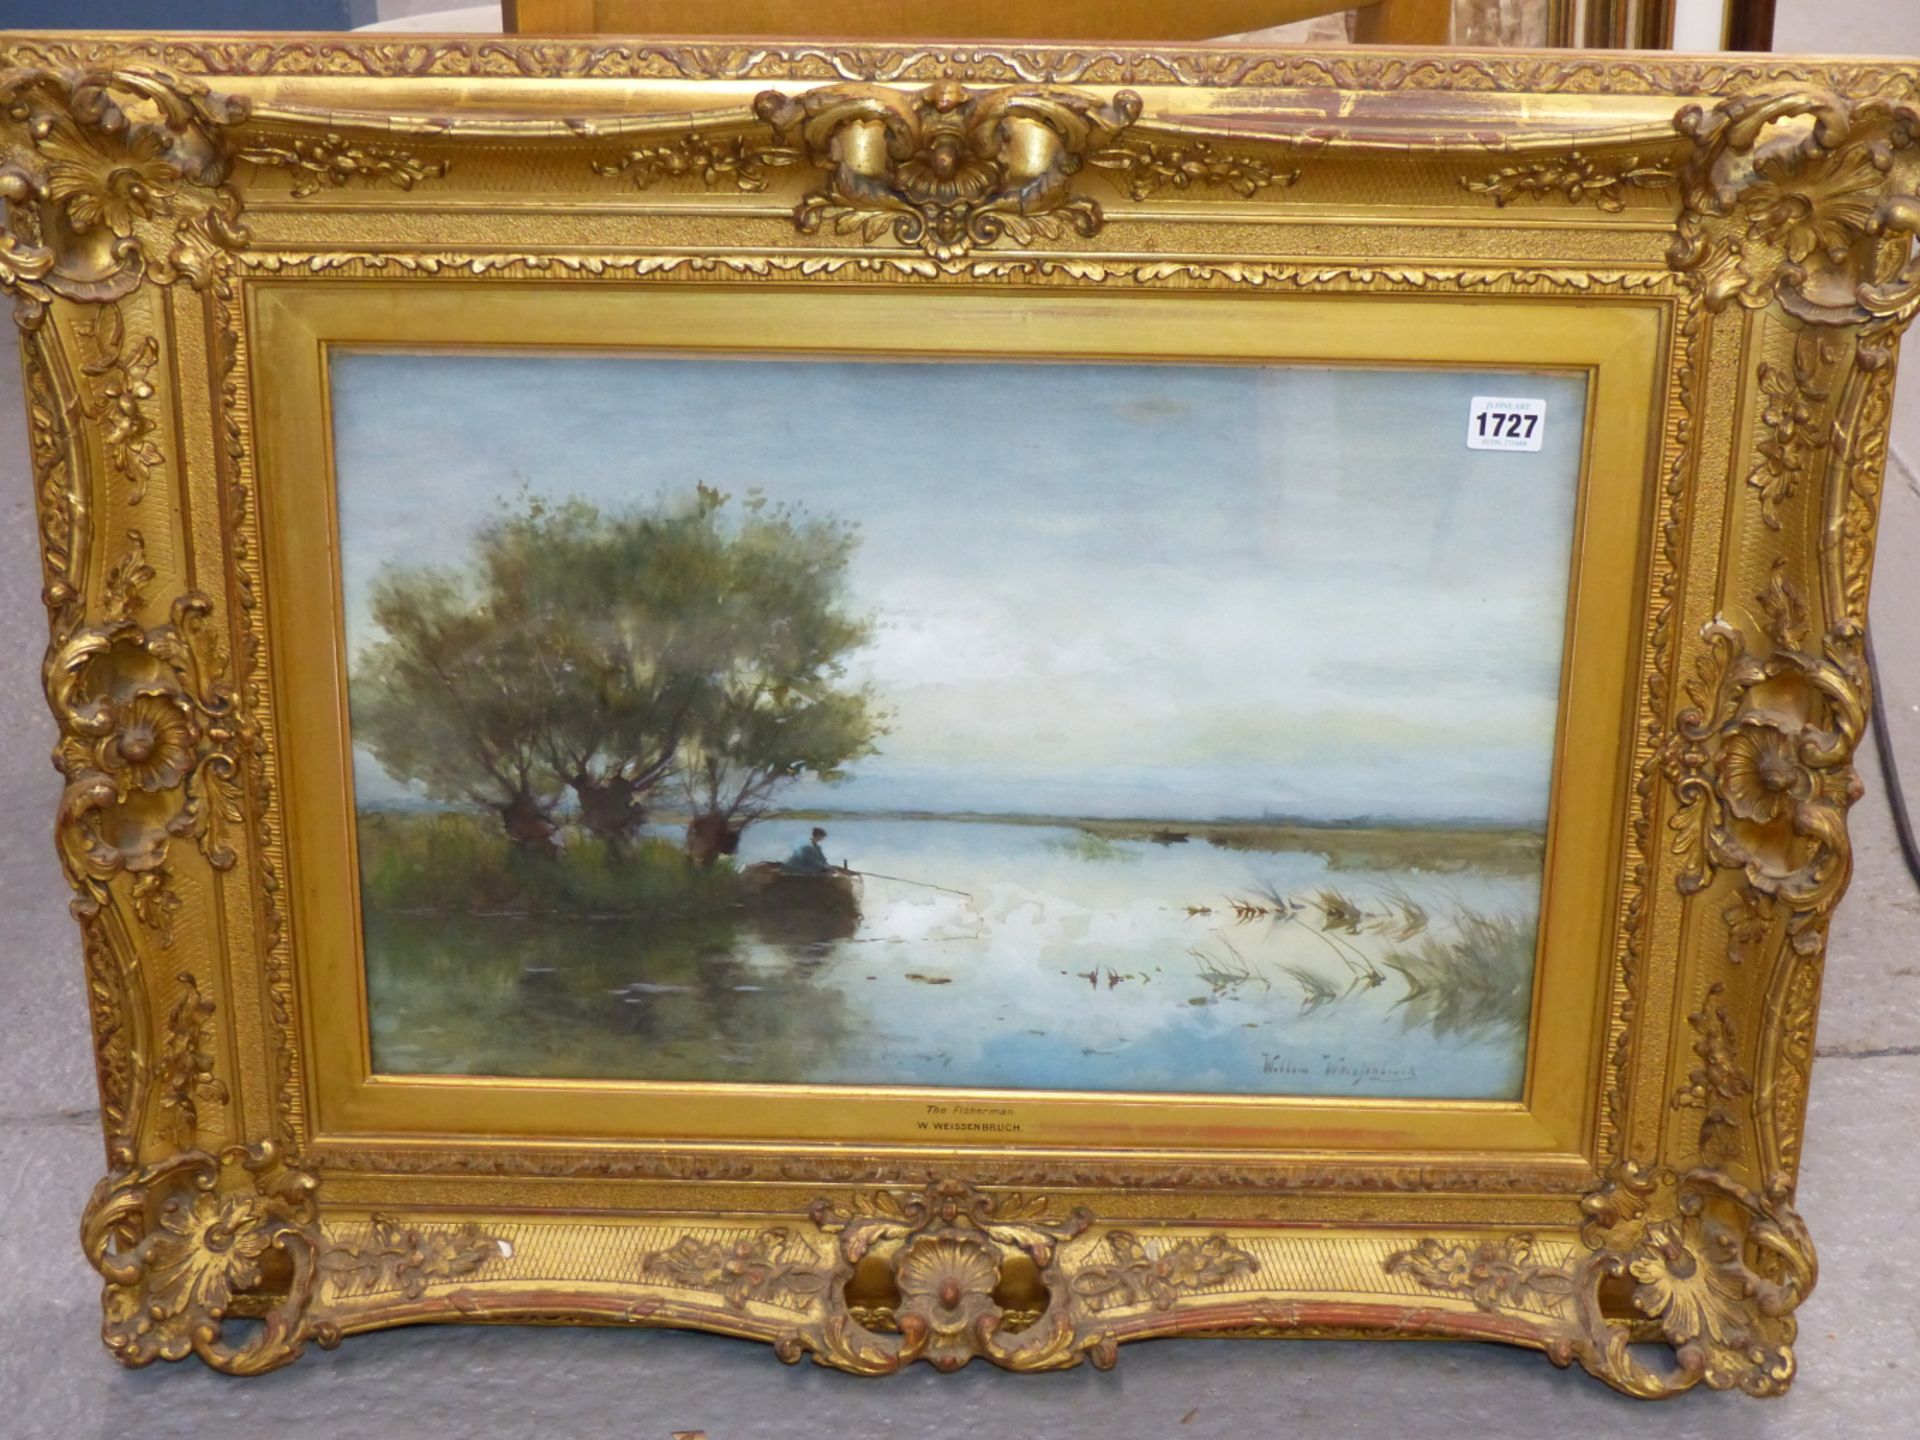 WILLEM WEISSENBRUCH ( 1864-1941) THE FISHERMAN. WATERCOLOUR. SIGNED L/R. TITLED TO FRAME. 52 X 33 - Image 8 of 9